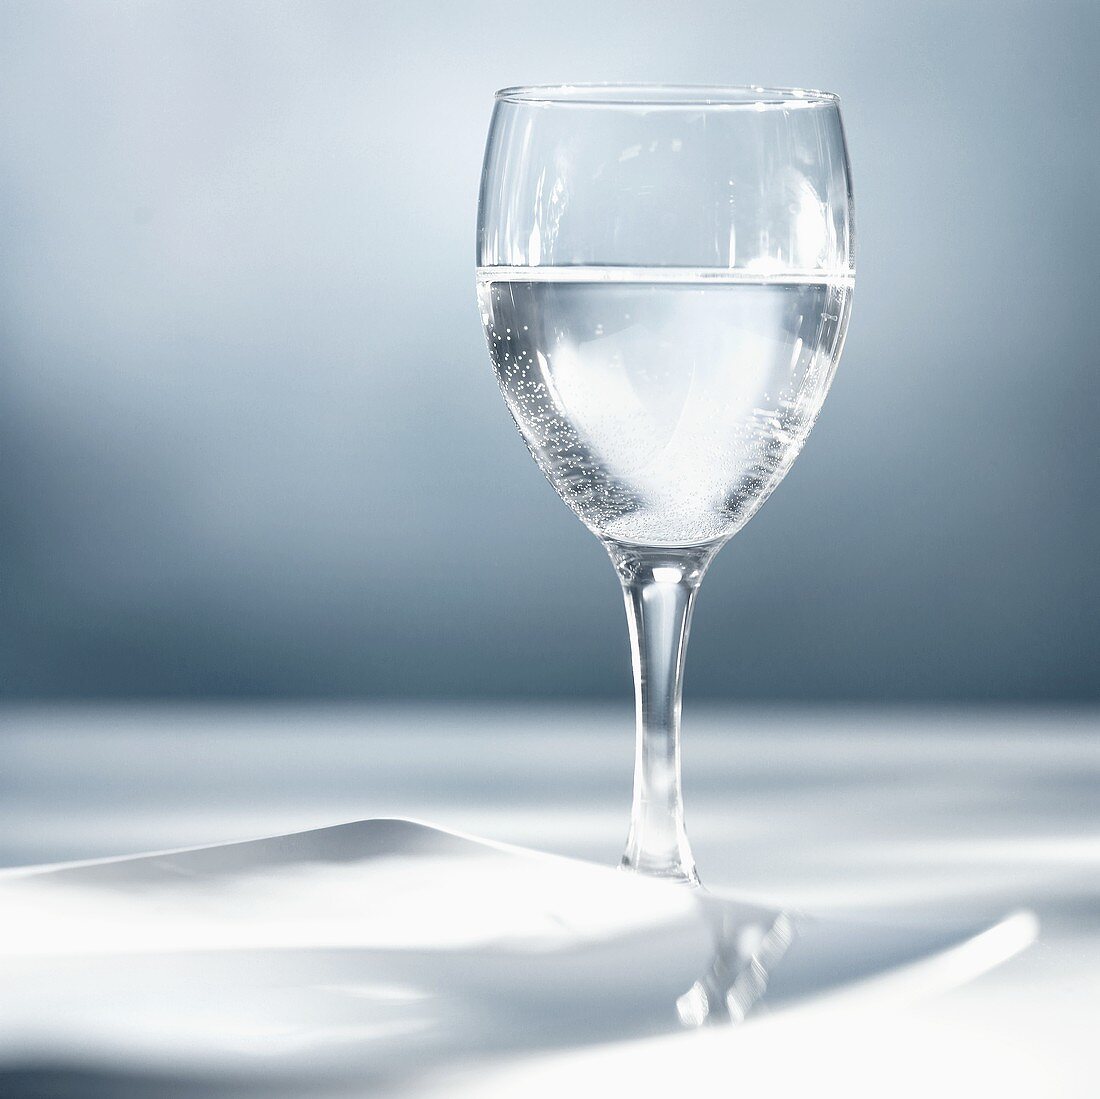 A glass of water with plate